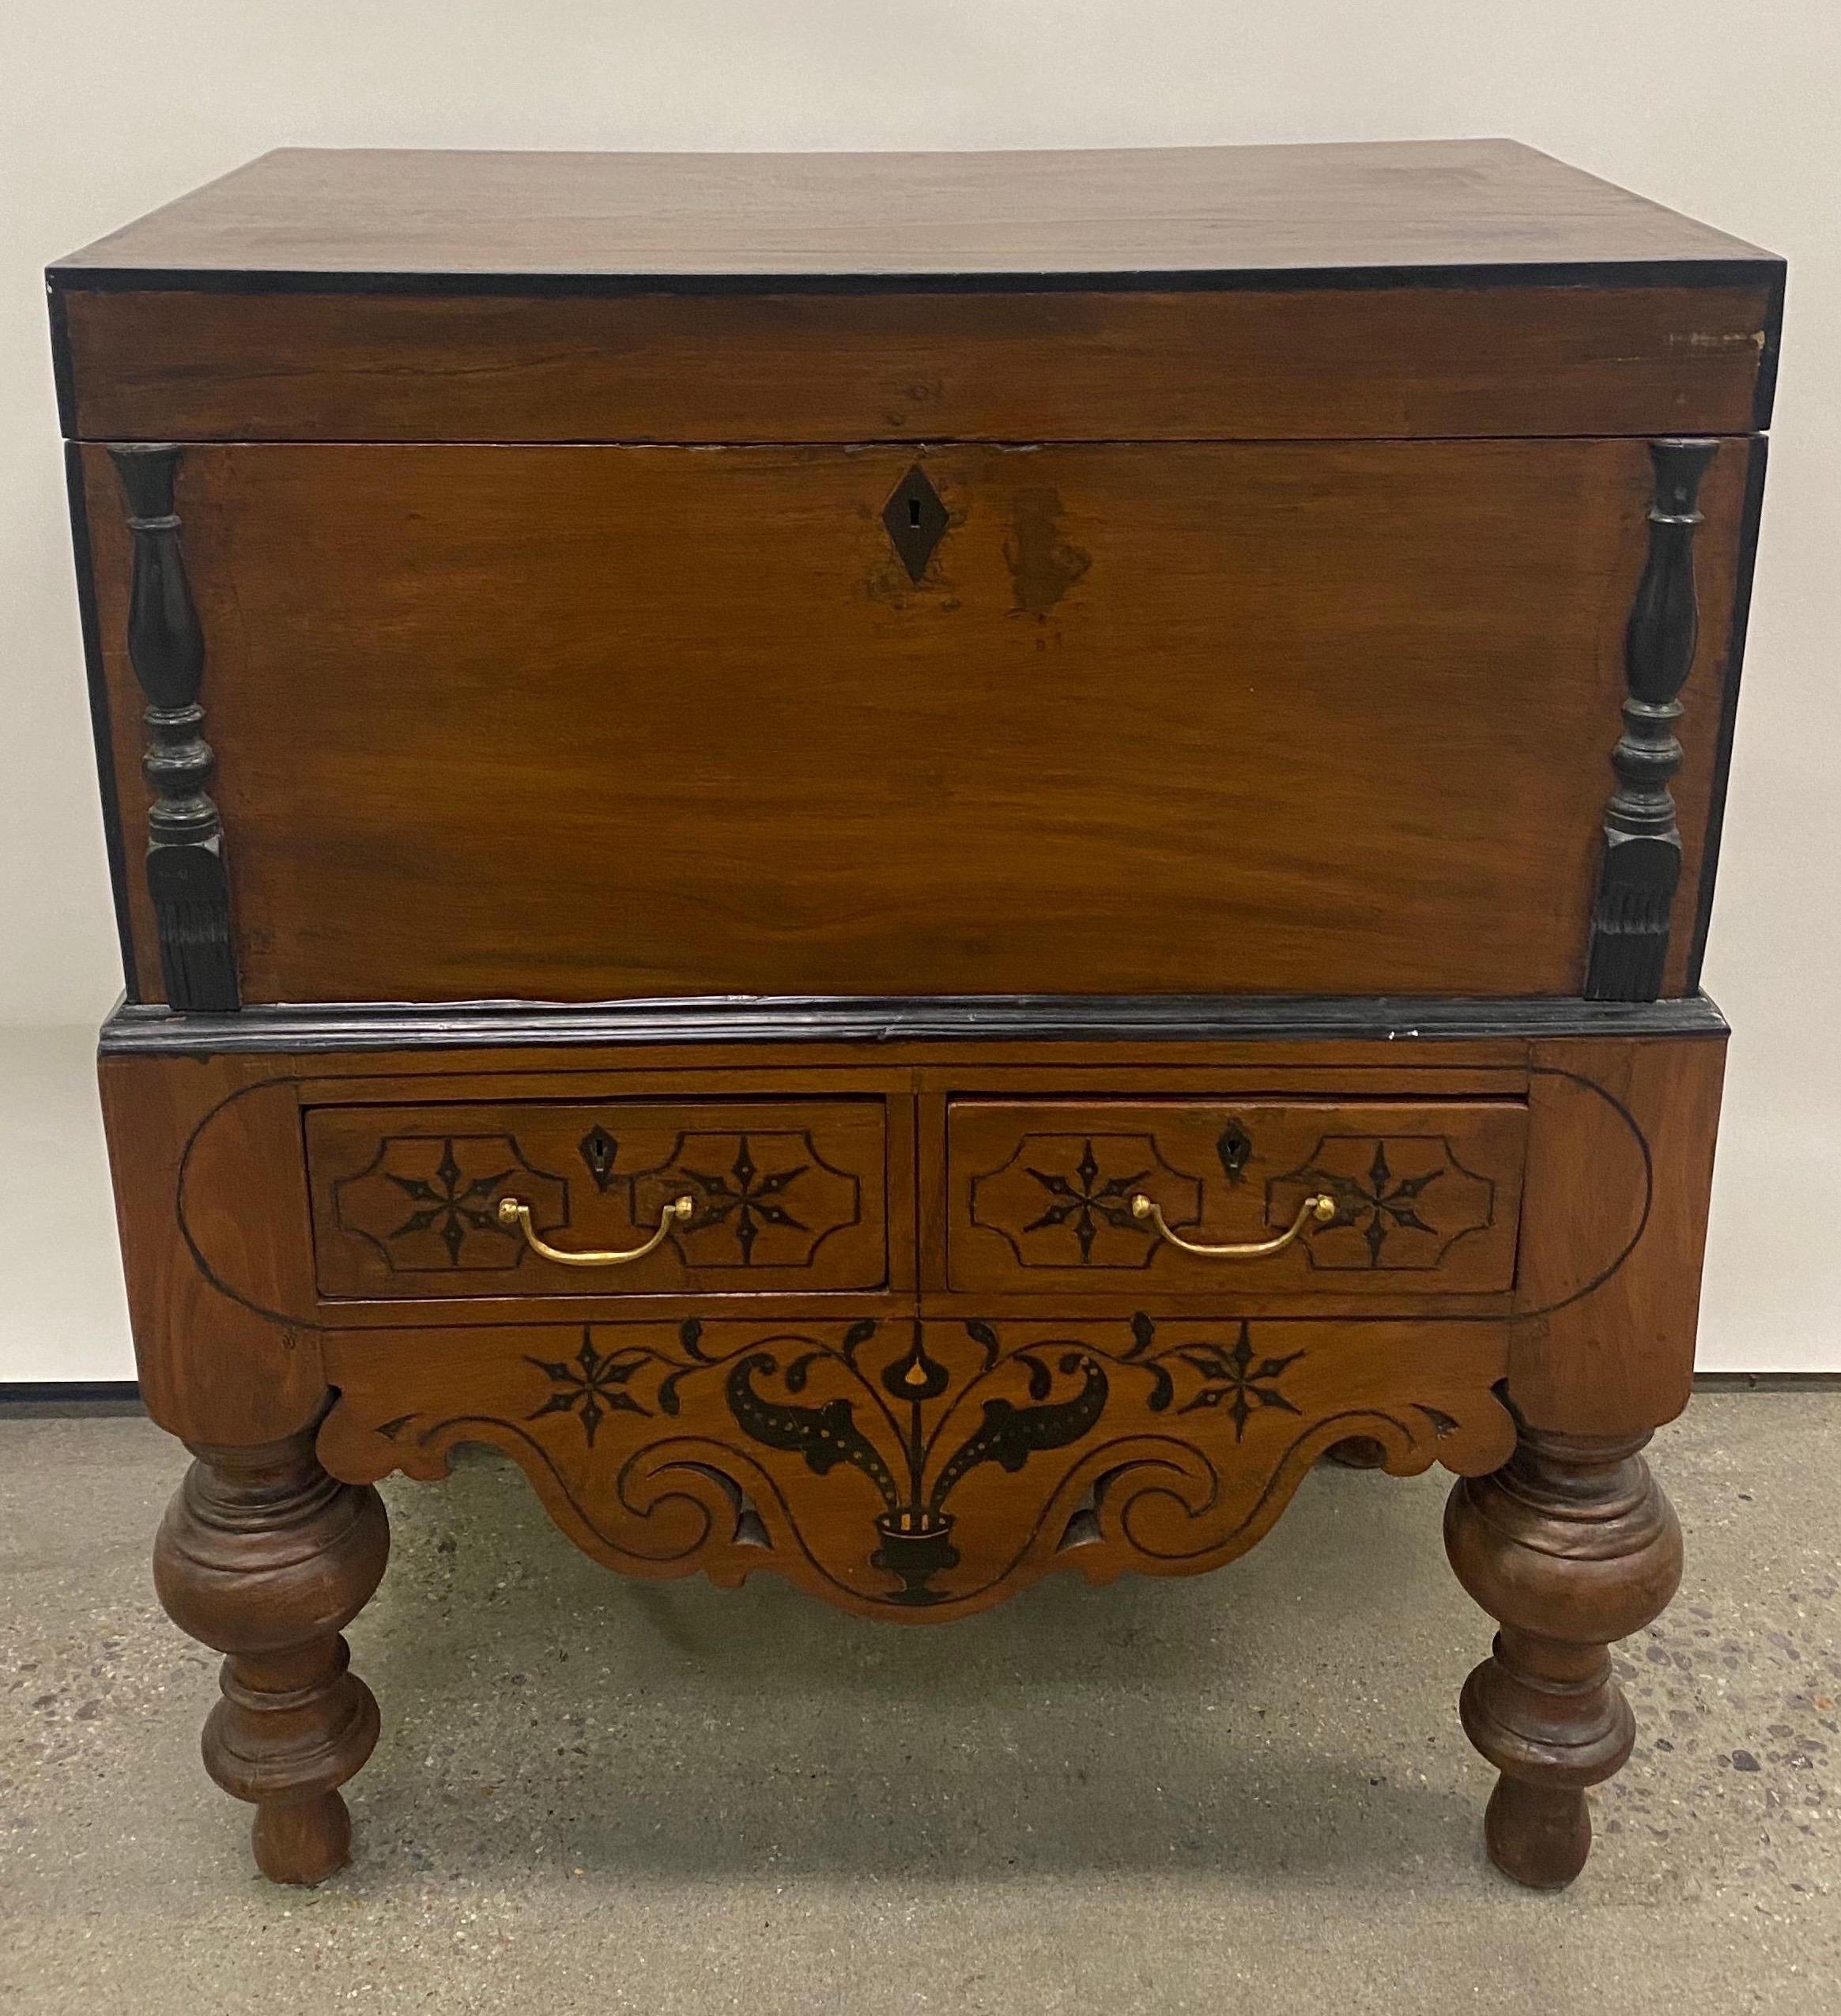 19th century ebonized jackwood British Colonial box on stand from British Ceylon (Modern day Sri Lanka). Two part box on Stand is made of Jackwood with ebonized elements. The base consists of turned legs and an inlaid and ebonized apron with 2